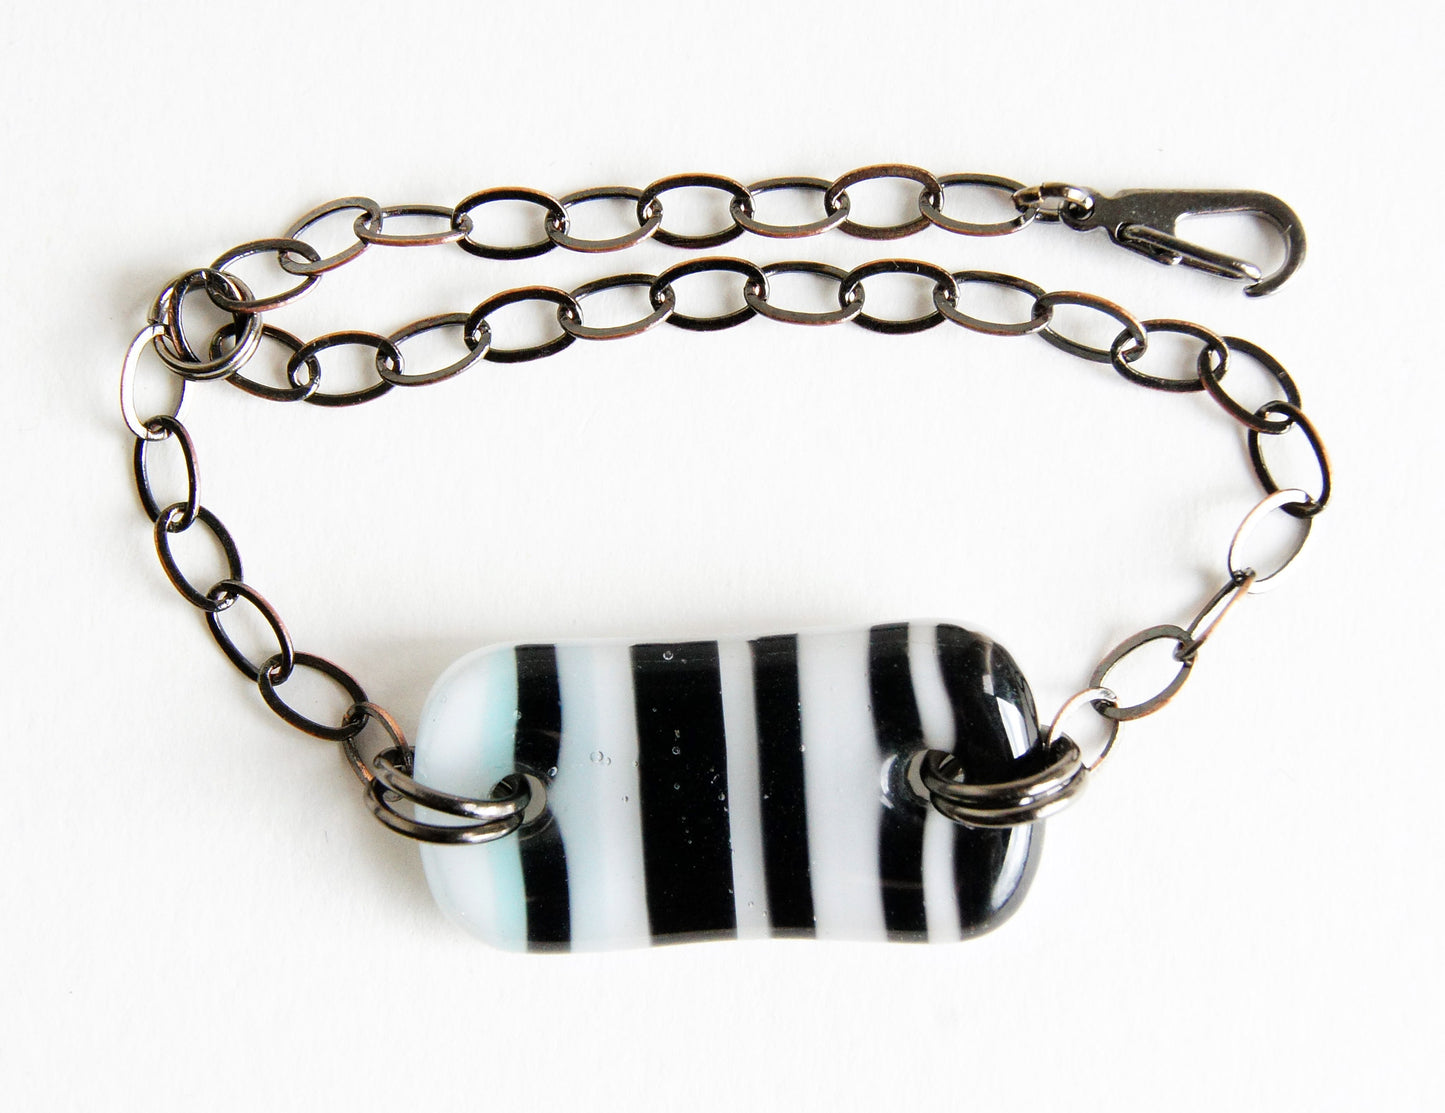 Fused glass bracelet with black stripes on white handmade by Leila Cools.